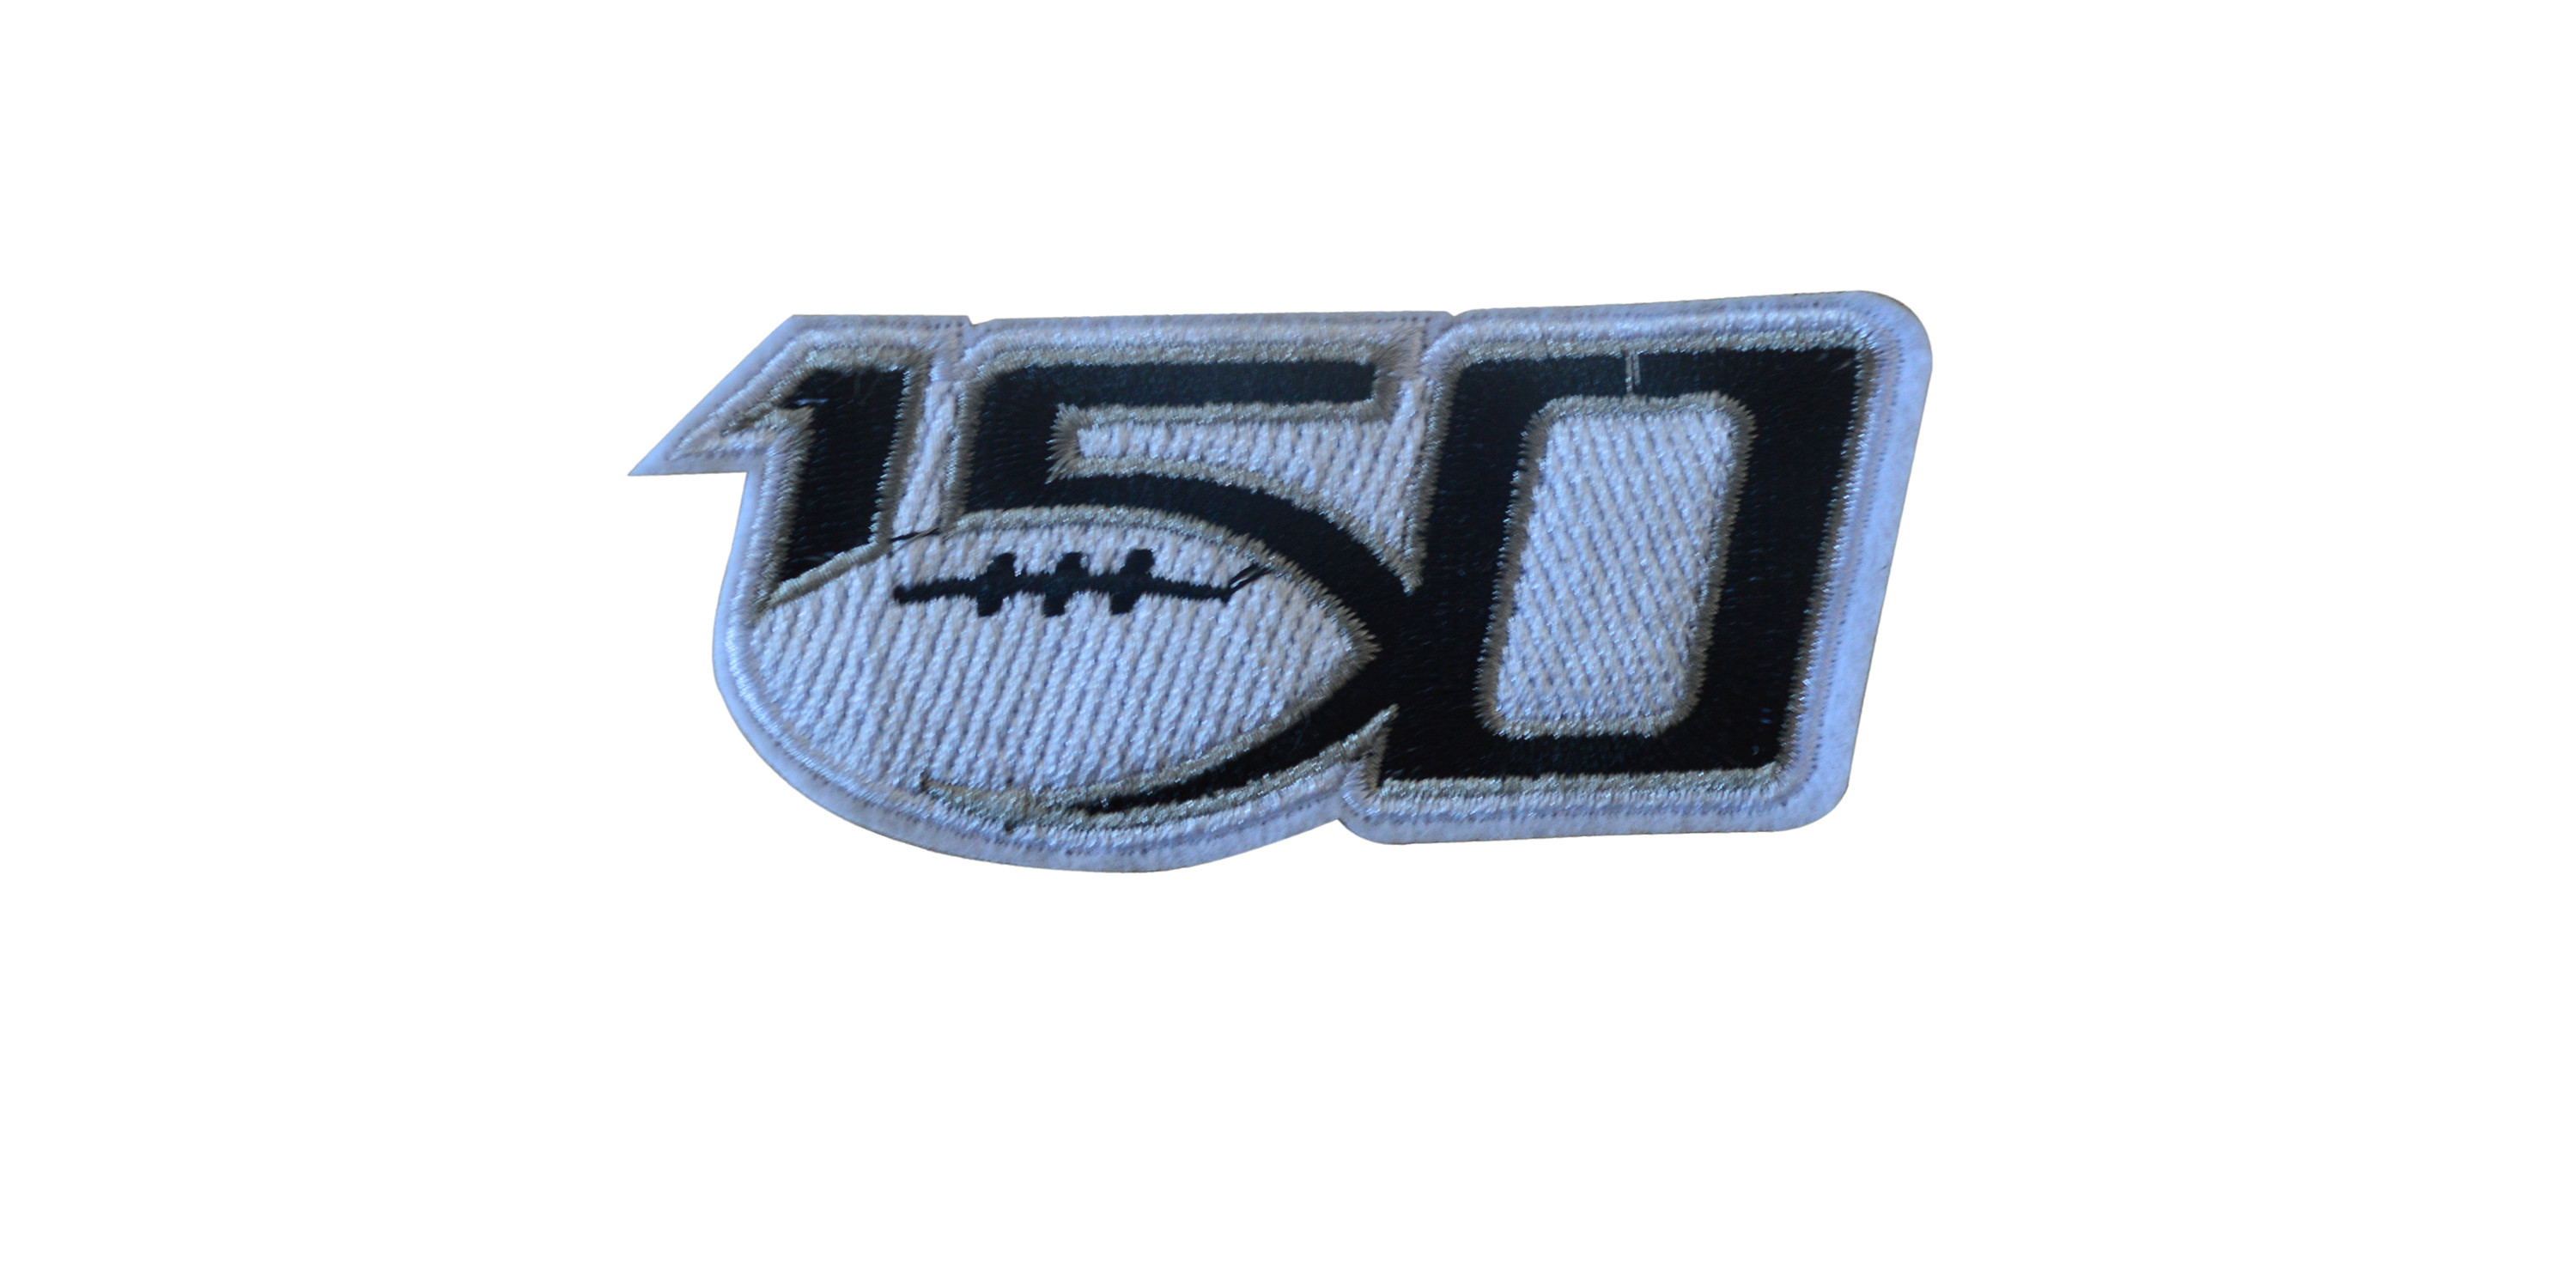 NCAA College Football 150th Anniversary Patch 2019